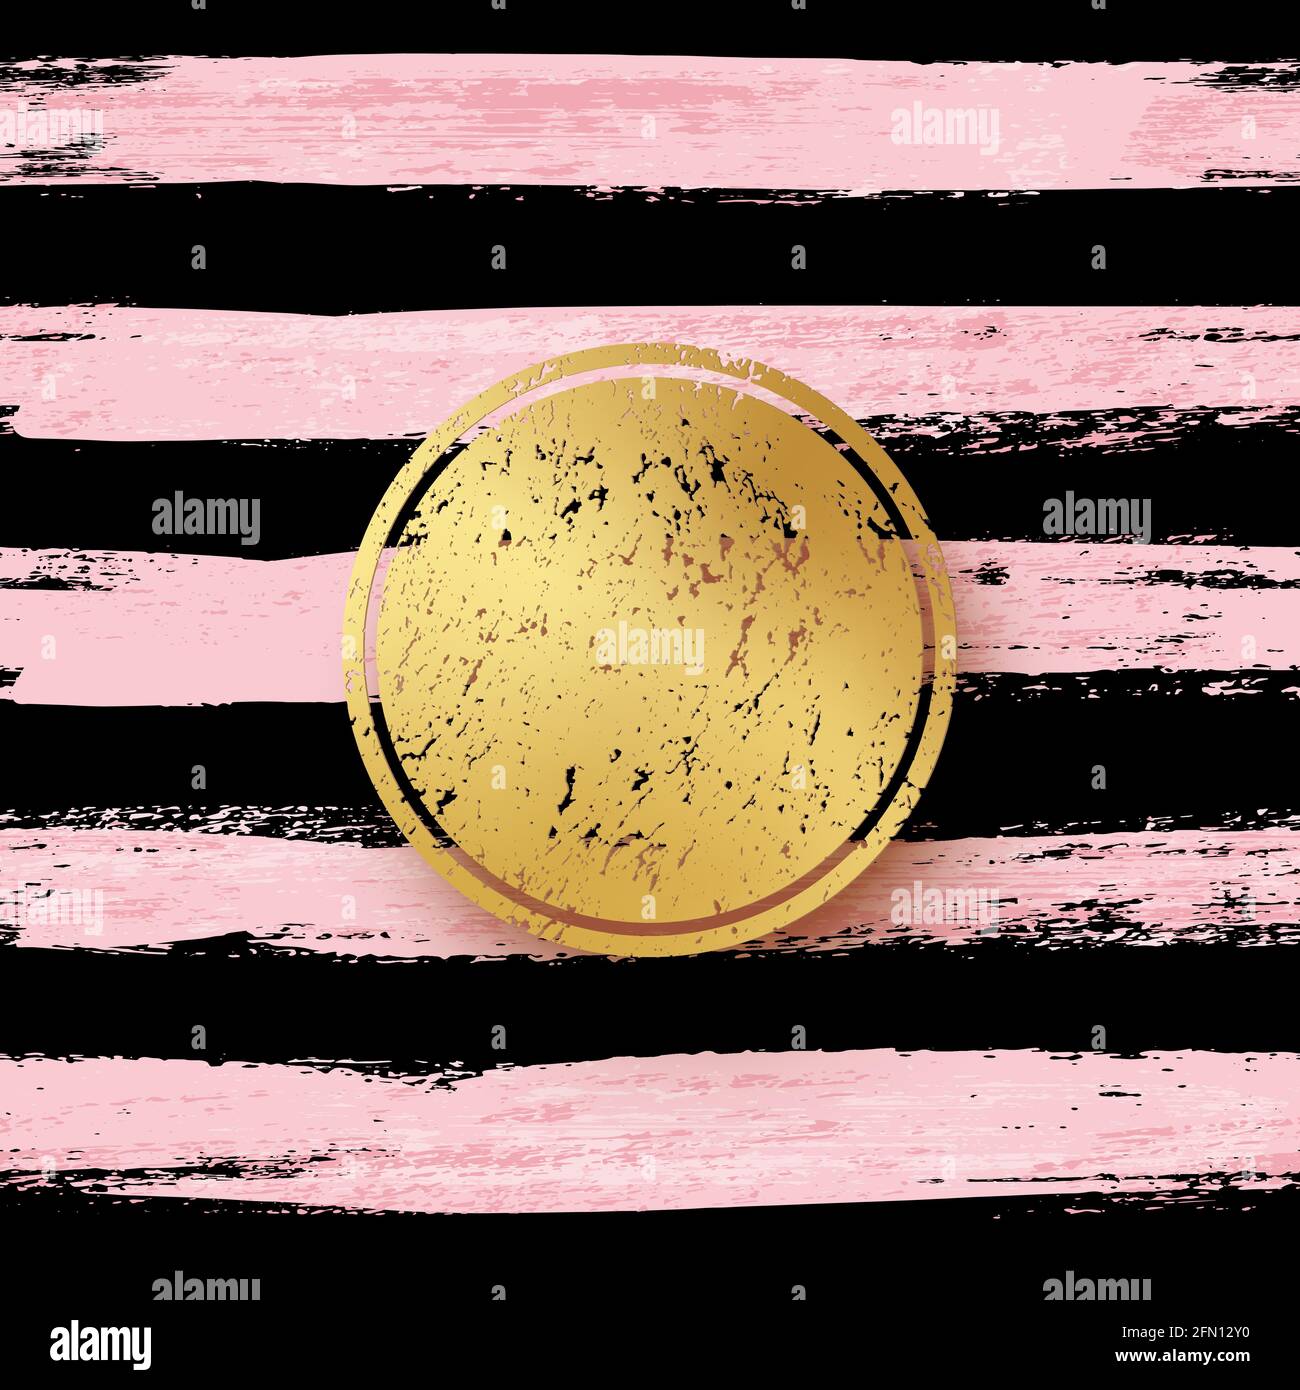 Golden foil with frame on black and pink brush background. Gold texture in round shape on smudged striped wallpaper in brushstrokes vector illustratio Stock Vector